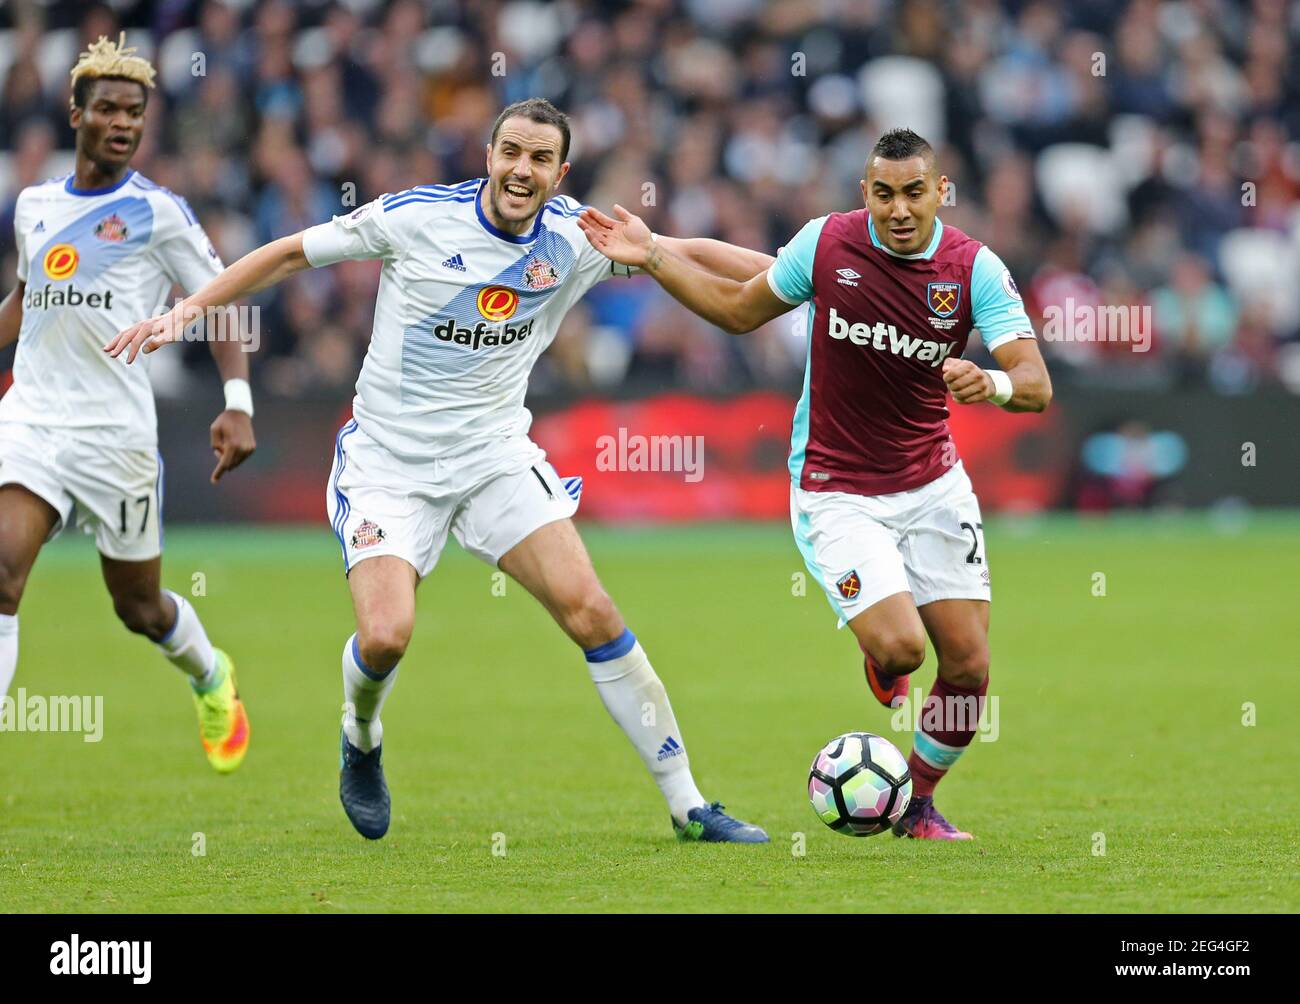 Britain Soccer Football - West Ham United v Sunderland - Premier League - London Stadium - 22/10/16 West Ham United's Dimitri Payet in action with Sunderland's John O'Shea Reuters / Paul Hackett Livepic EDITORIAL USE ONLY. No use with unauthorized audio, video, data, fixture lists, club/league logos or 'live' services. Online in-match use limited to 45 images, no video emulation. No use in betting, games or single club/league/player publications.  Please contact your account representative for further details. Stock Photo